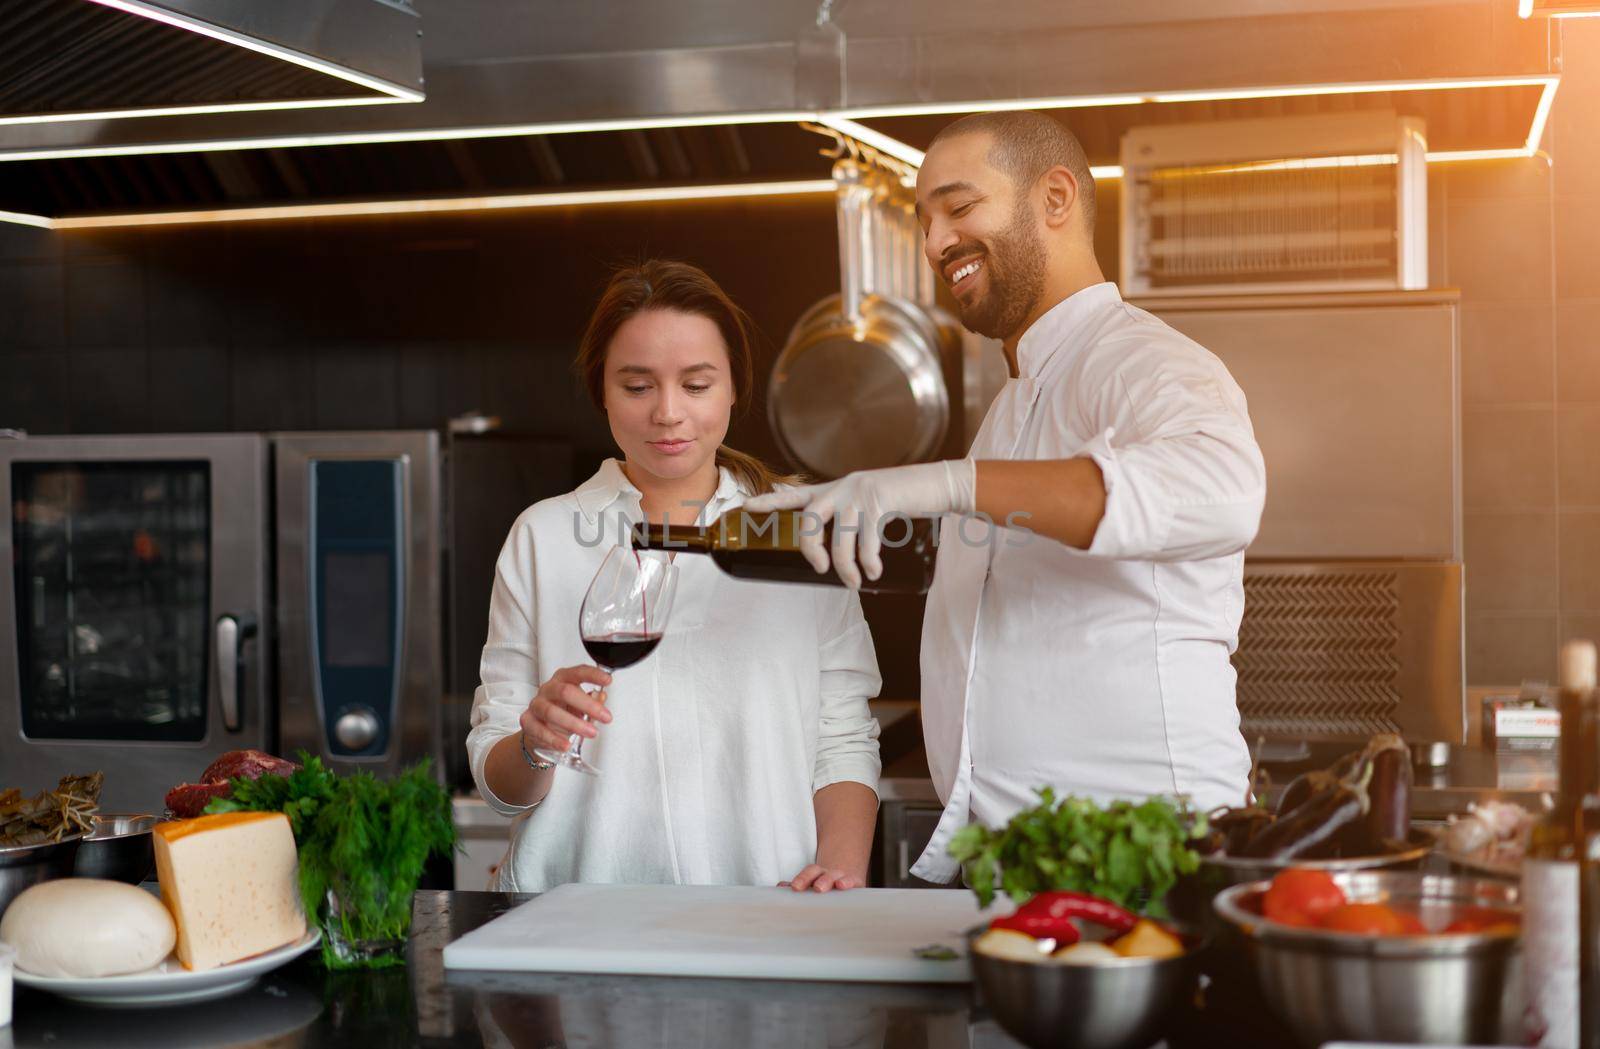 Handsome young African chef is cooking together with Caucasian girlfriend in the kitchen using red wine ingredient. A cook teaches a girl how to cook. Man and woman cooking in professional kitchen.